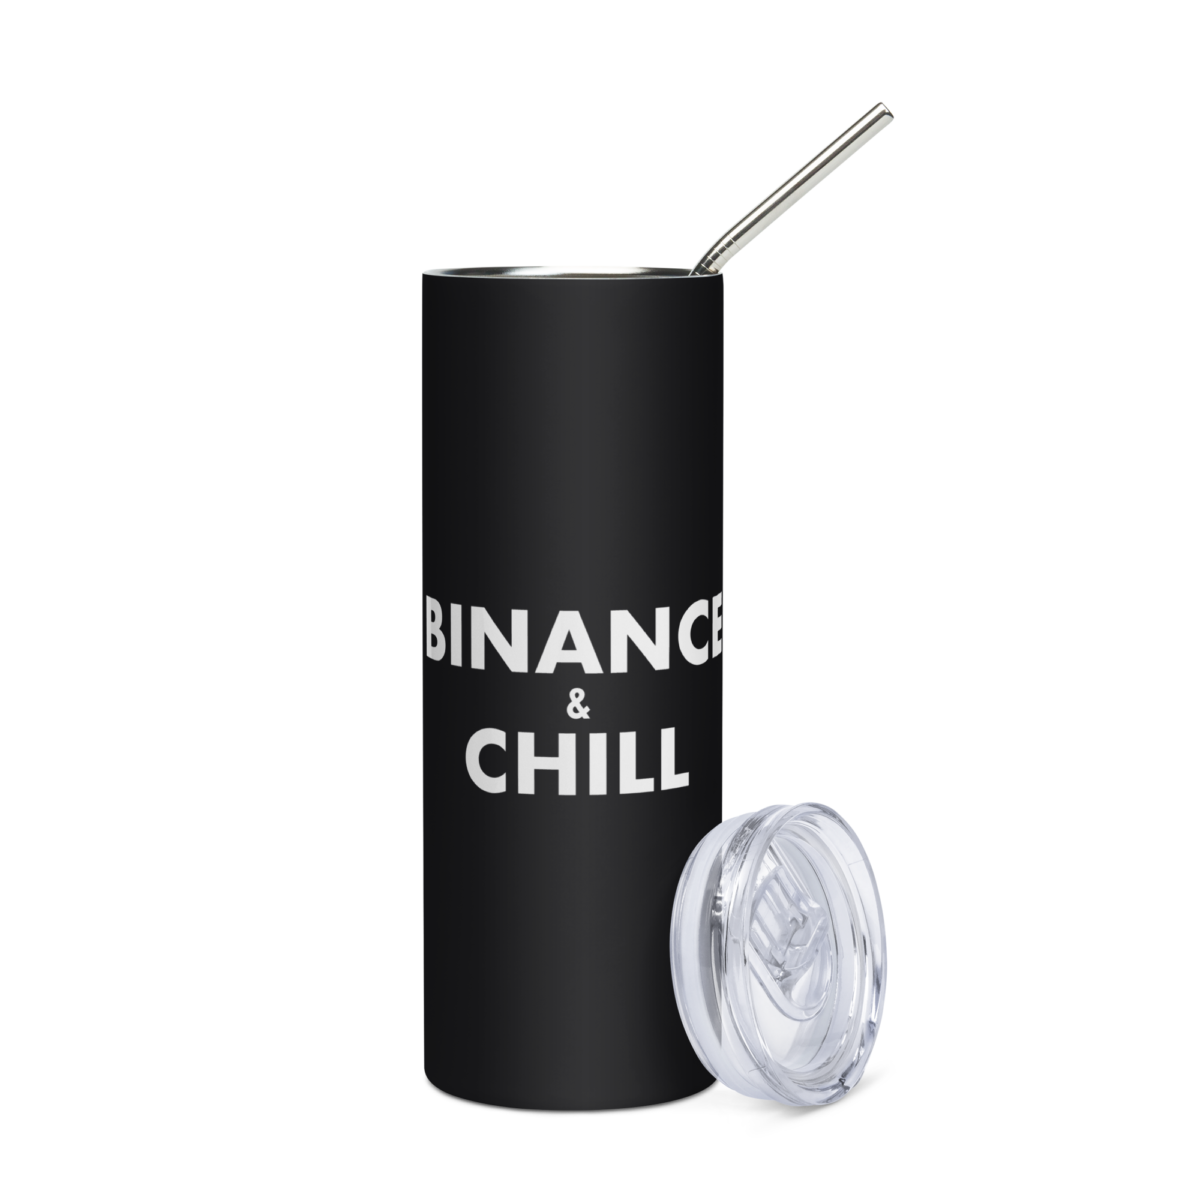 stainless steel tumbler black front 63a06185d8c45 - Binance & Chill Stainless Steel Tumbler